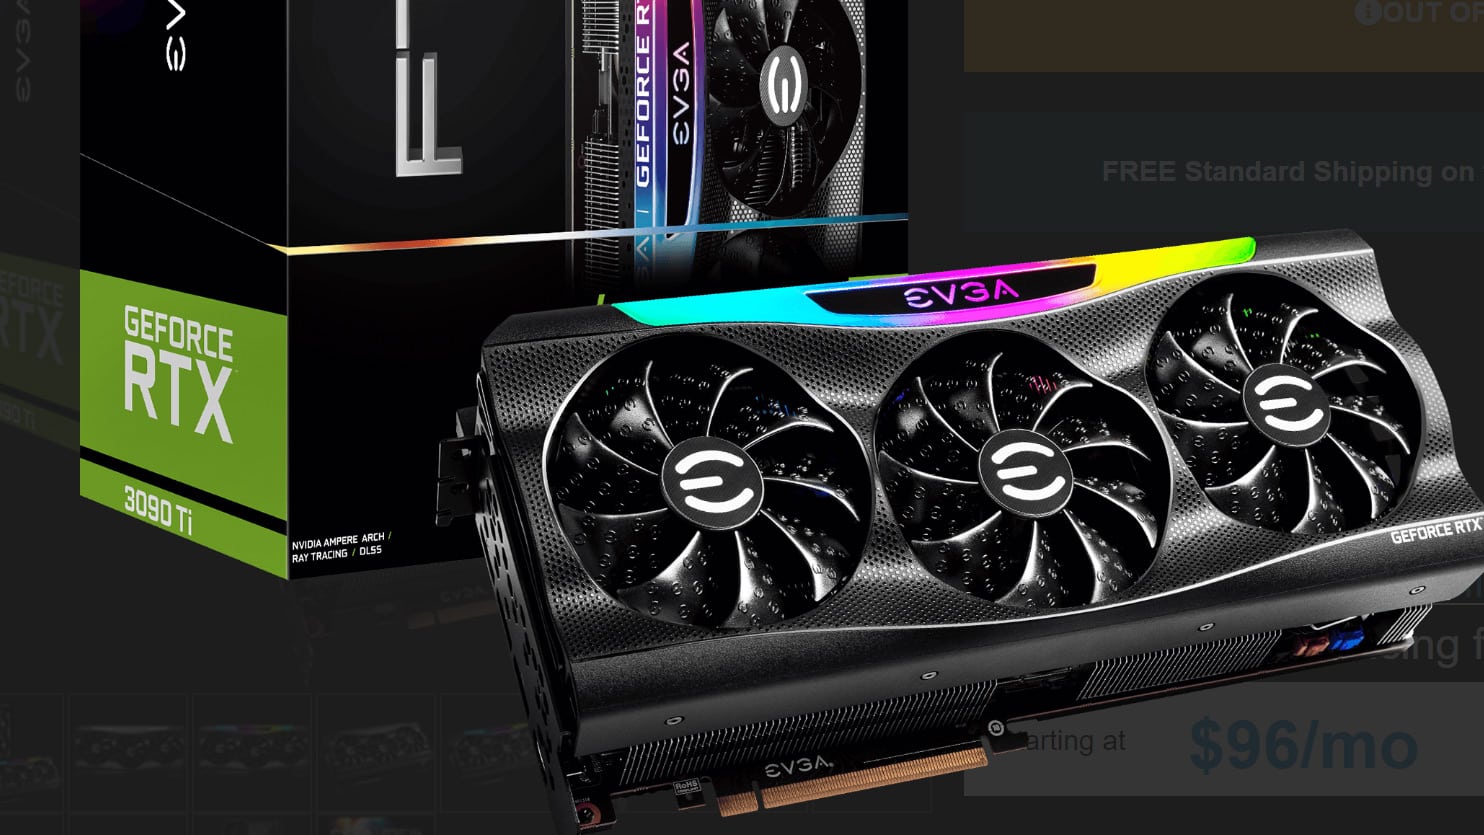 EVGA discounts the price of a GeForce RTX 3090Ti card by $ 1,000